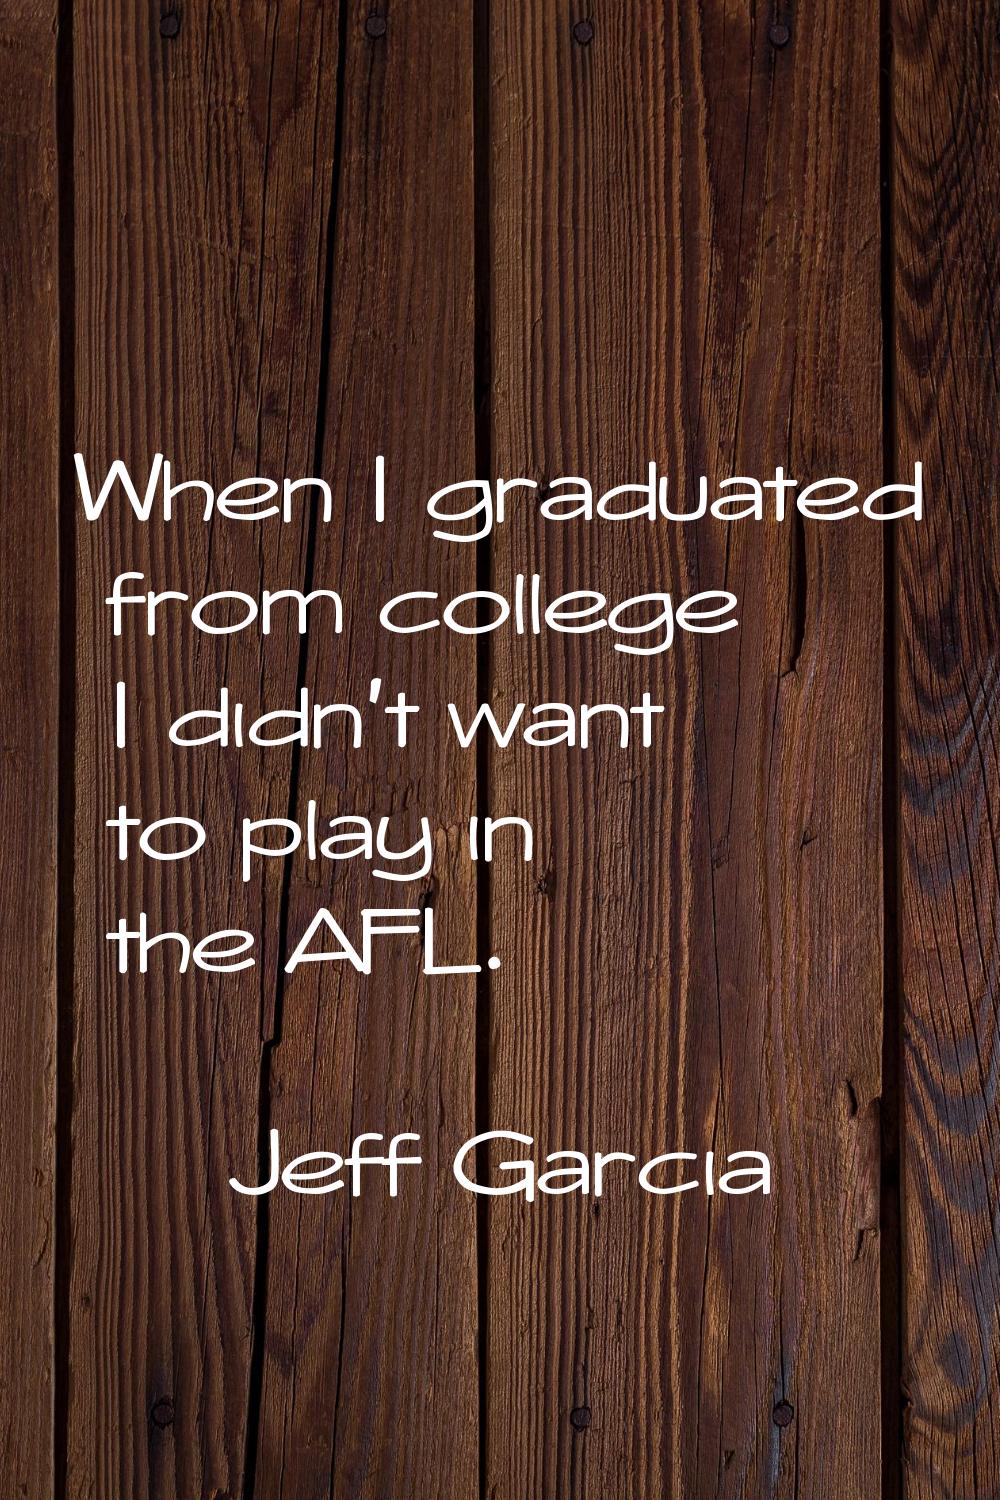 When I graduated from college I didn't want to play in the AFL.